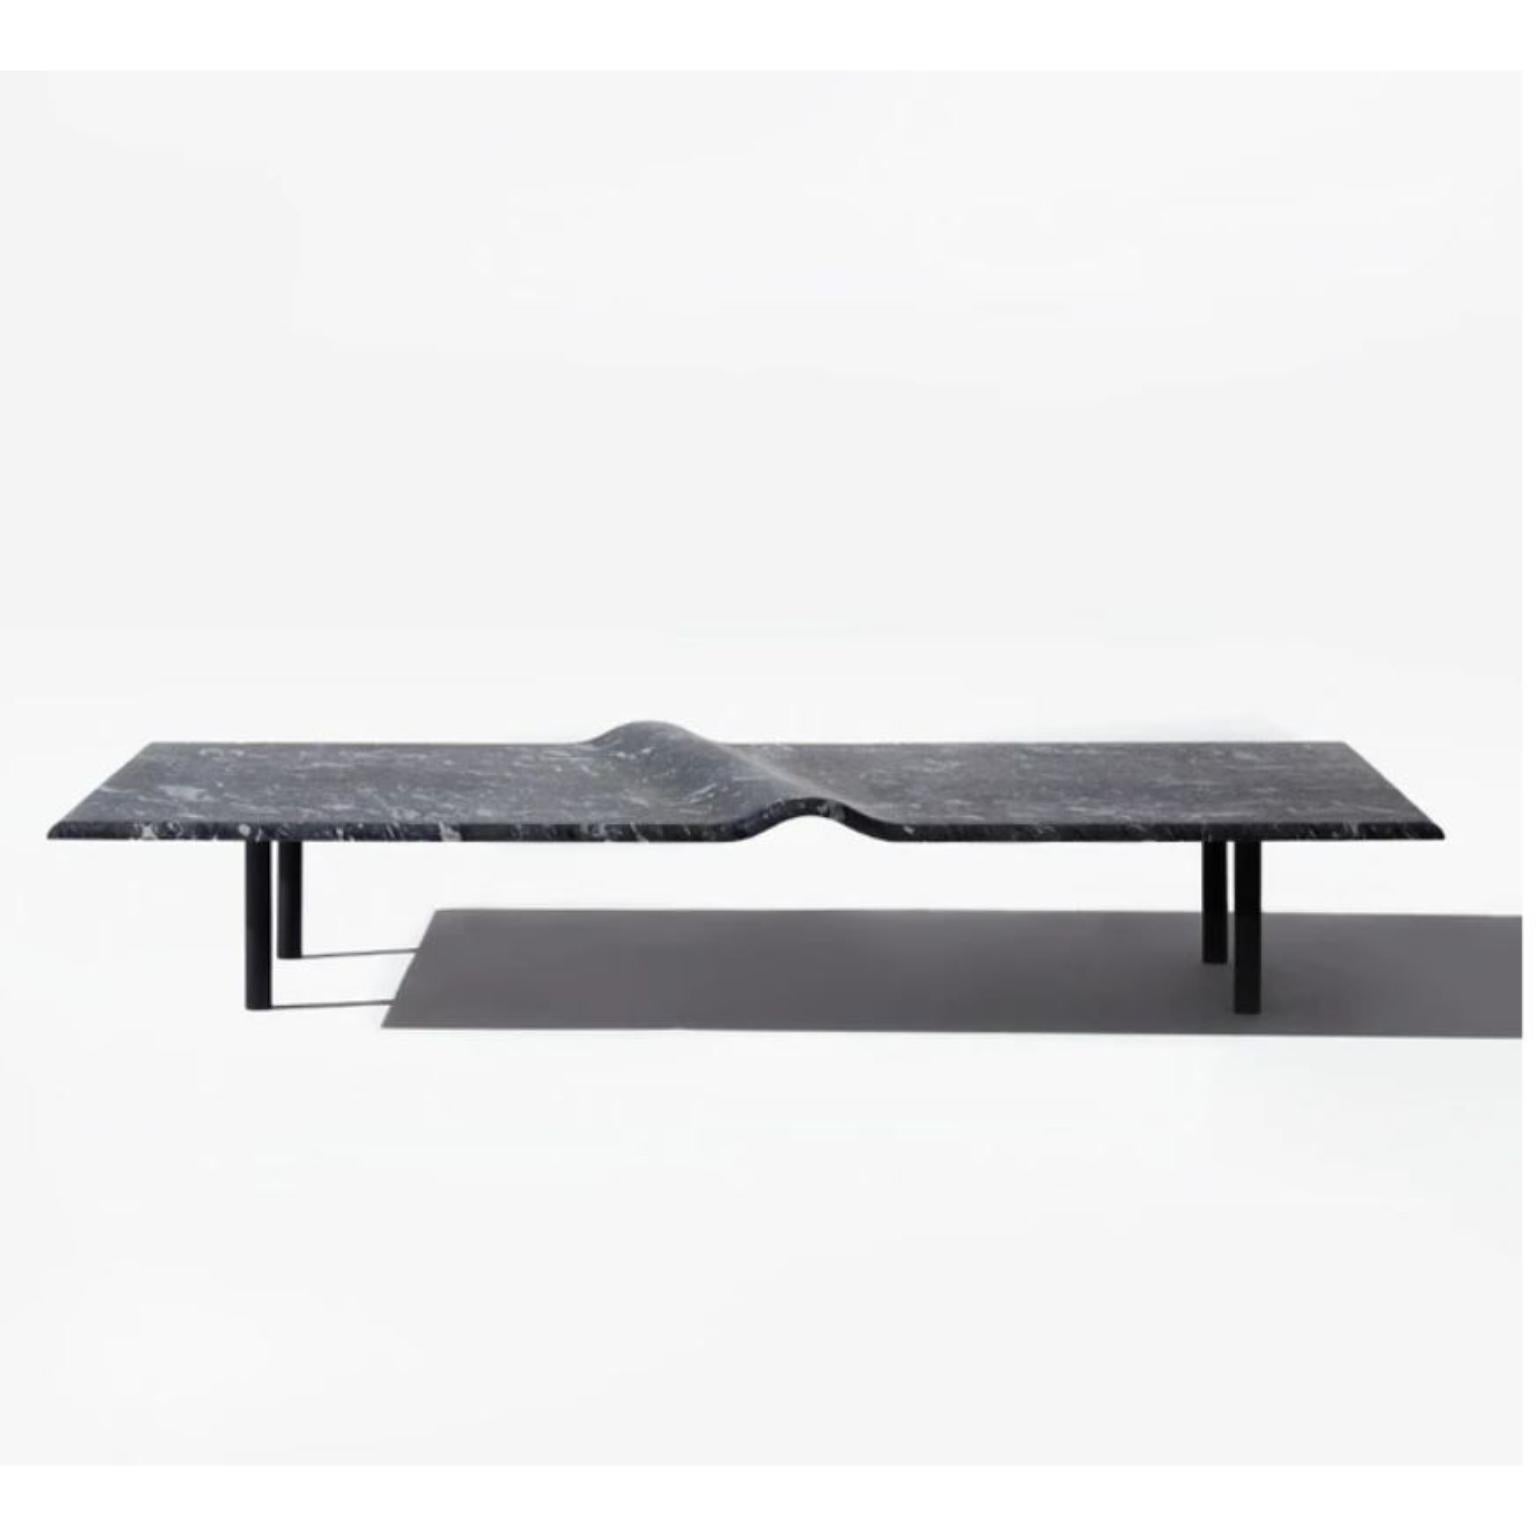 Onda Coffee Table by Wentz
Dimensions: D 80 x W 160 x H 28 cm
Materials: Granite/Quartzite, Steel/Stainless Steel.

The Onda Center Table is associated with the image of the sea. The sculpture in the granite stone creates the perfect curve – marked